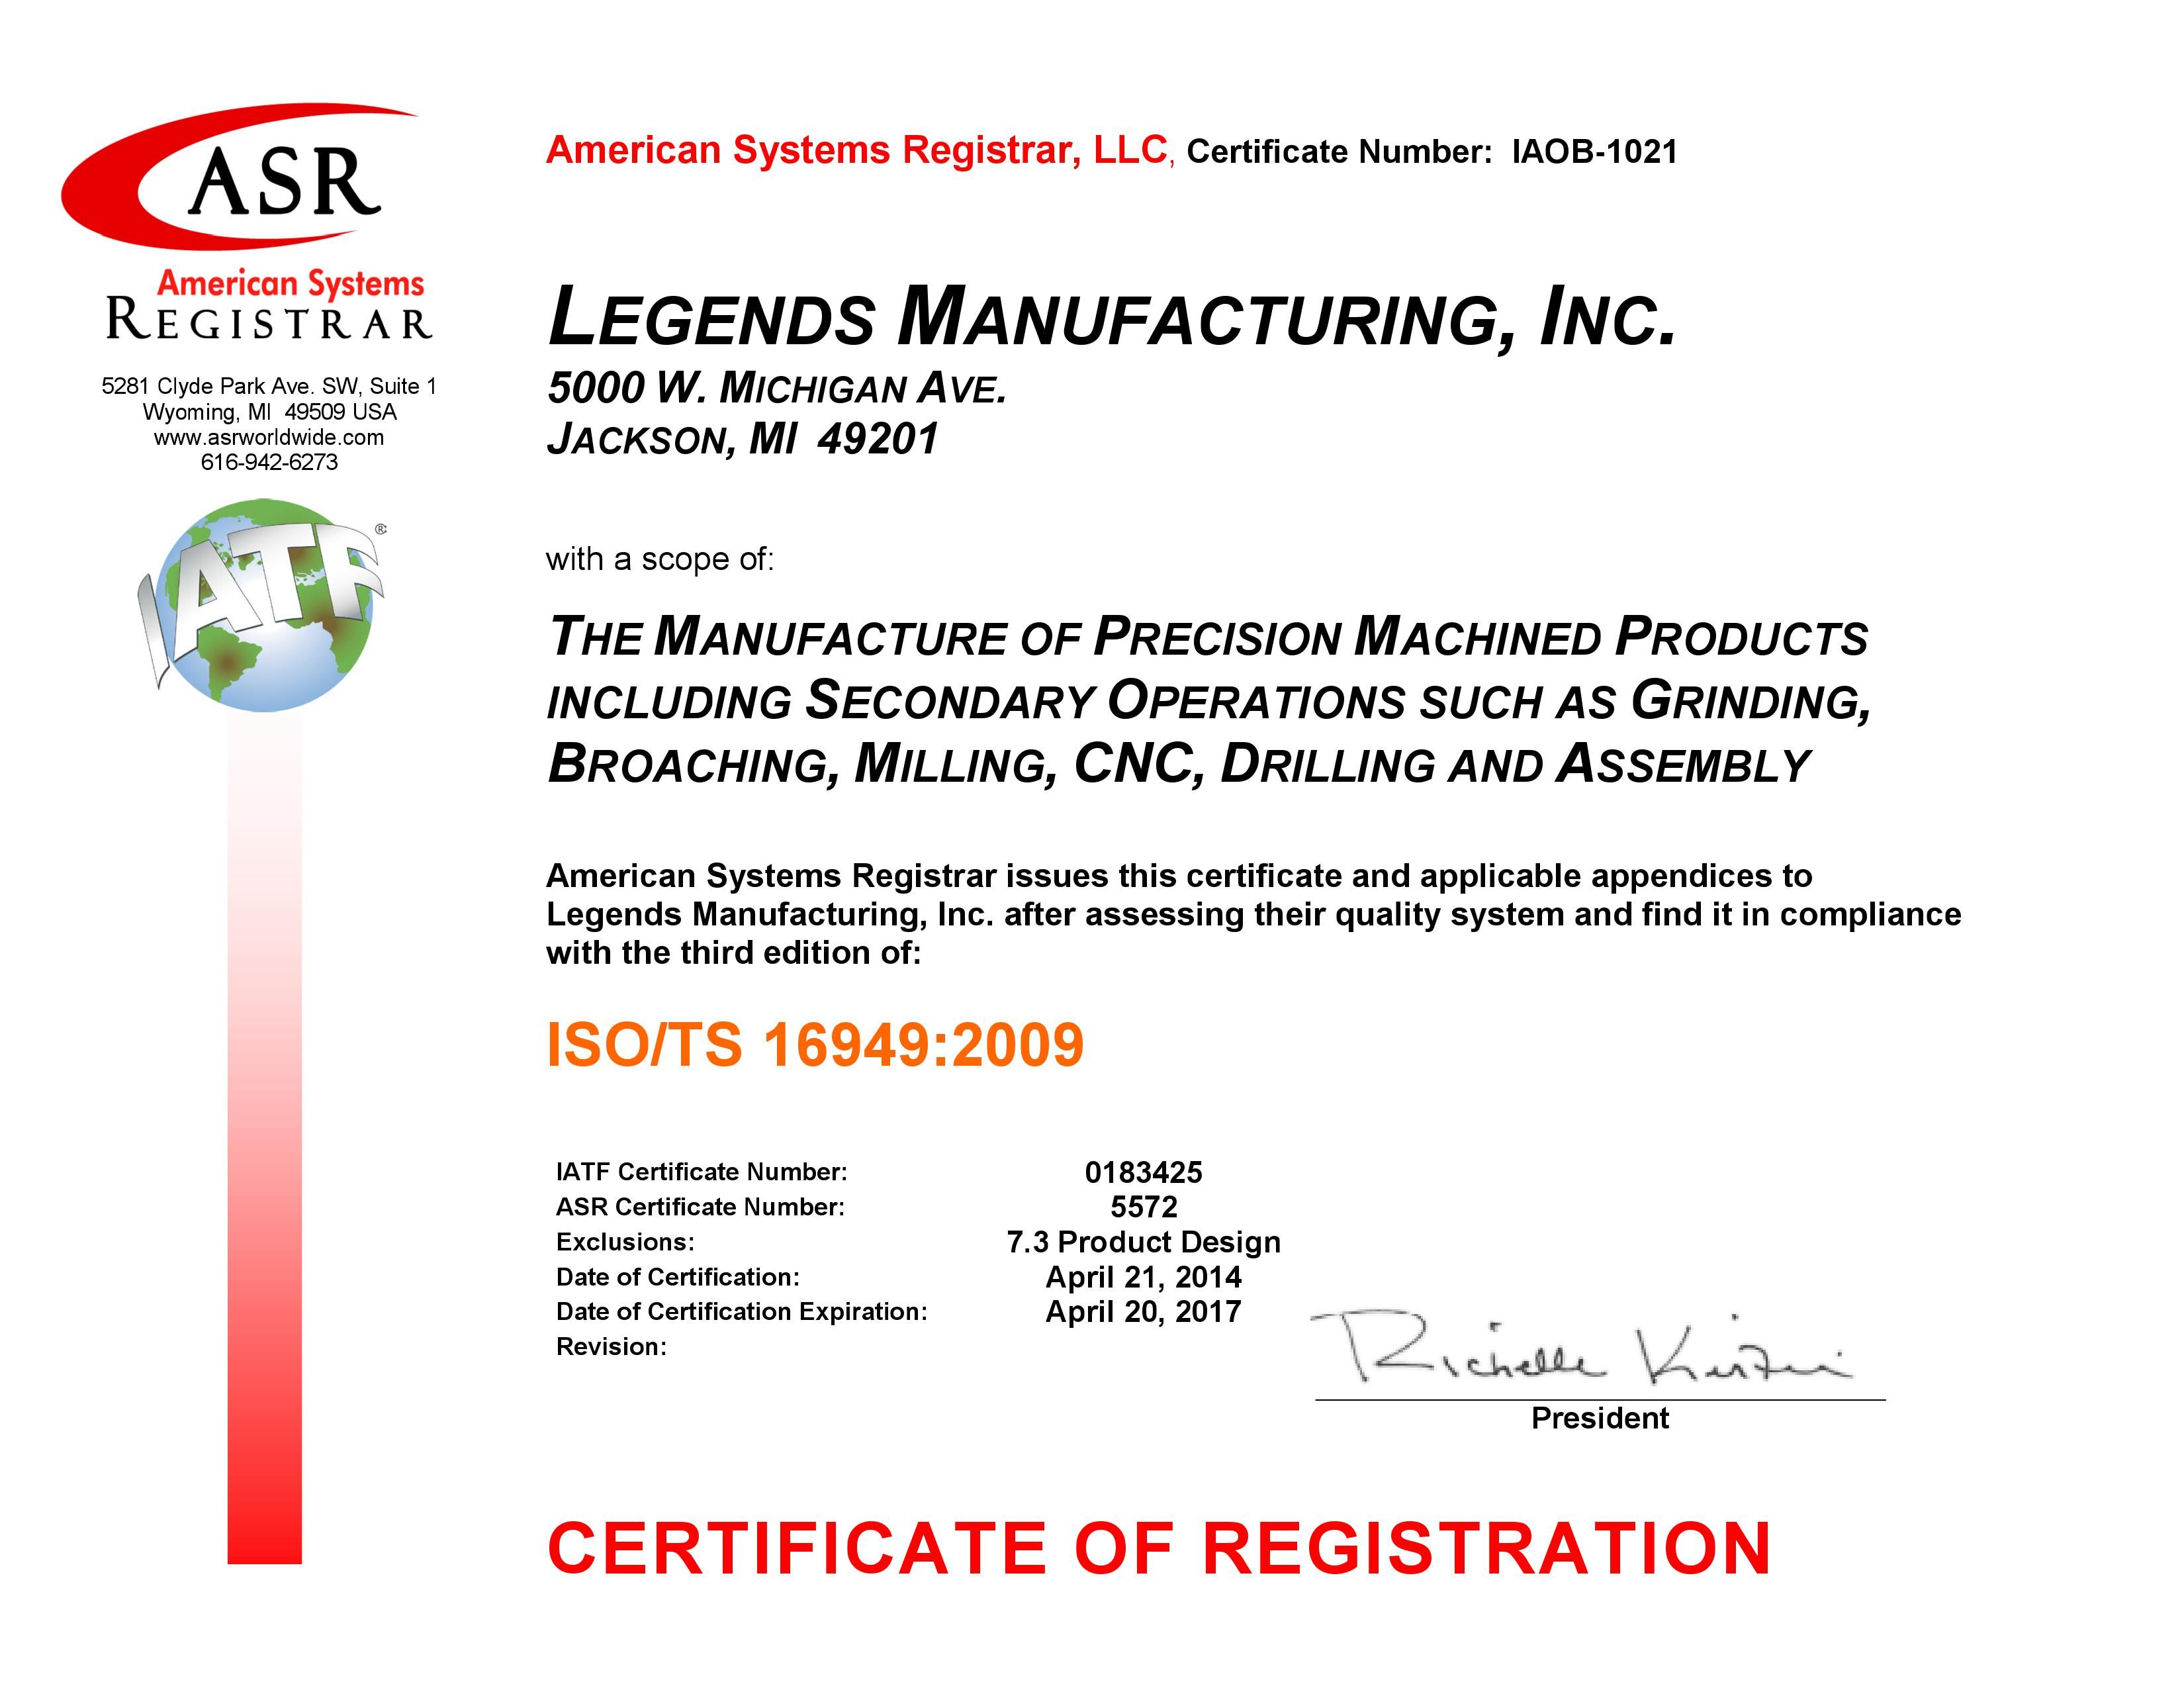 Legends Manufacturing ISO/TS 16949 Certificate